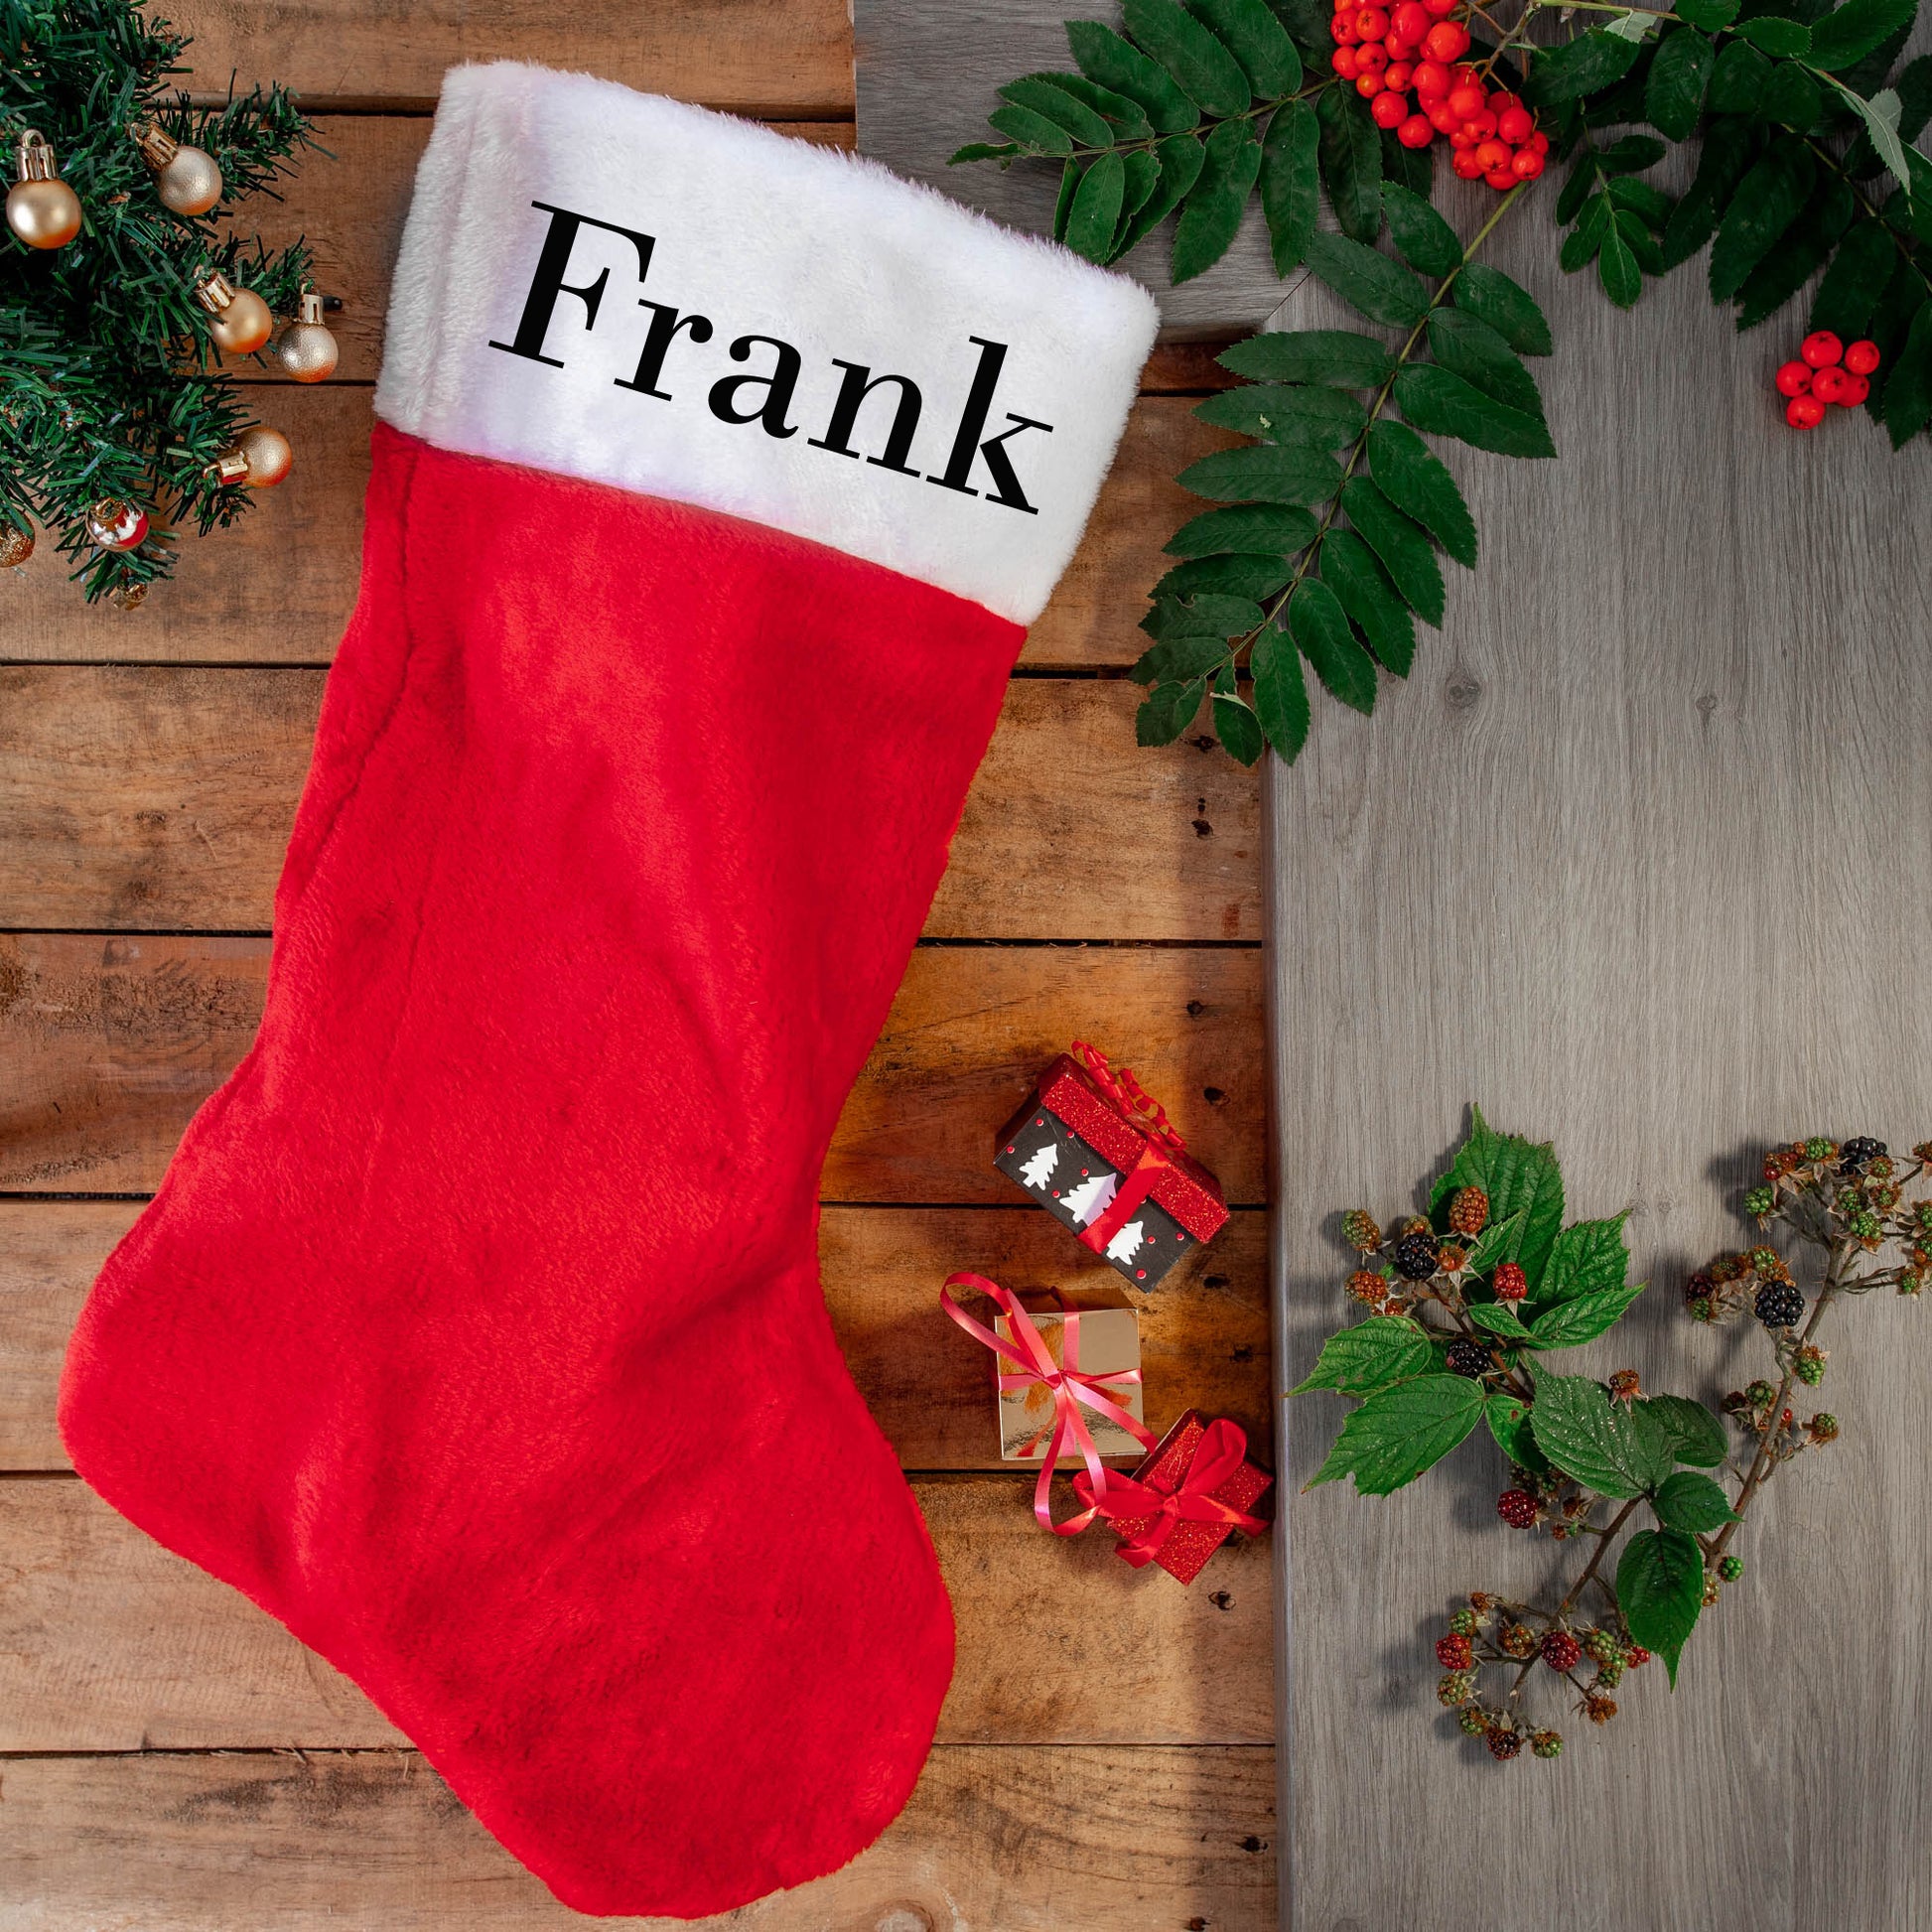 Embroidered Luxury Plush Red Christmas Stocking Jumbo or Standard Size Personalised With Any Name  - Always Looking Good - Jumbo  